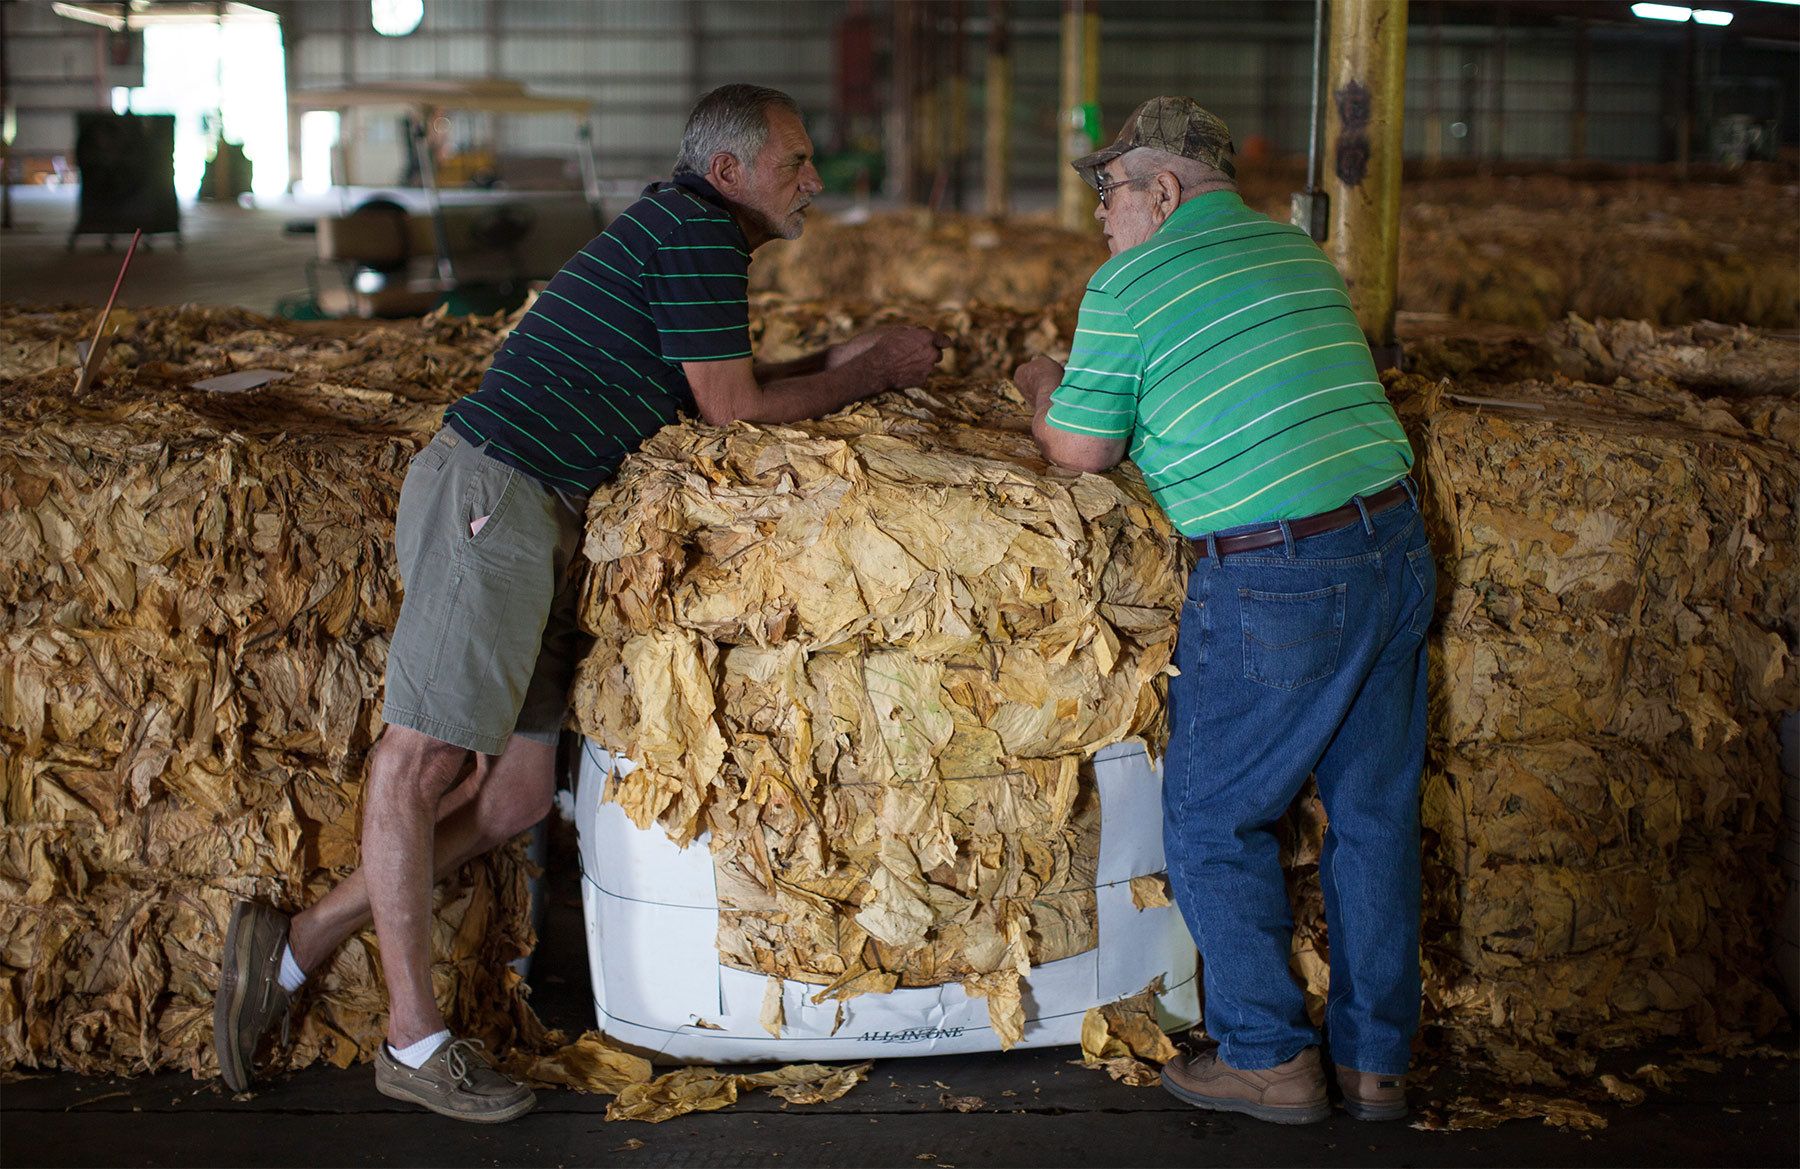 A day before the markets open, tobacco farmer Pressley Johnson (left) and warehouse manager Elton Johnson talk by a bundle of tobacco at the Big L Warehouse in Mullins, South Carolina July 26, 2013. The warehouse is co-owned by farmer Johnny Shelly but leased to the US Tobacco Cooperative during harvest. The cooperative sets the standard for pricing and quality of the farmer's crop. The traditional tobacco harvest requires many labor intensive hours to bring the crop to market, especially with the flue-cured variety prominent in the southern United States. With the growing health concerns with smoking in the US, most farmers use market cooperatives to sell their crop to the growing markets in China. Picture taken on July 26, 2013.   REUTERS/Randall Hill (UNITED STATES)